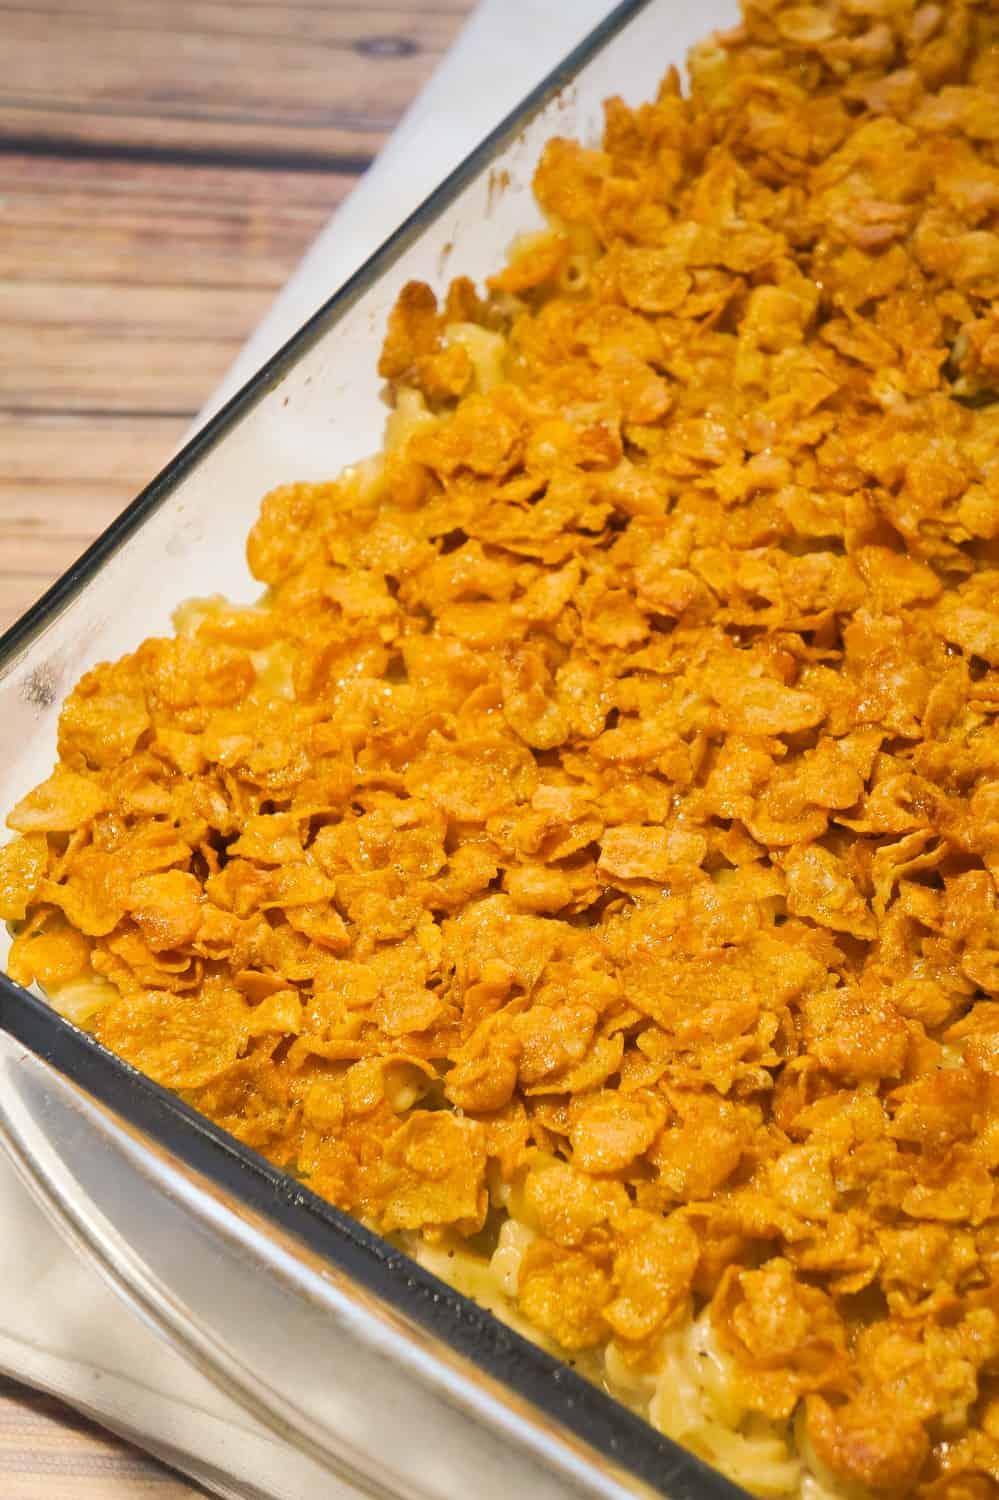 Breakfast Sausage Mac and Cheese topped with Frosted Flakes is a delicious brunch recipe with the perfect balance of savoury and sweet. This homemade macaroni and cheese is loaded with Havarti cheese and chunks of maple breakfast sausages with a crispy coating of frosted flakes.